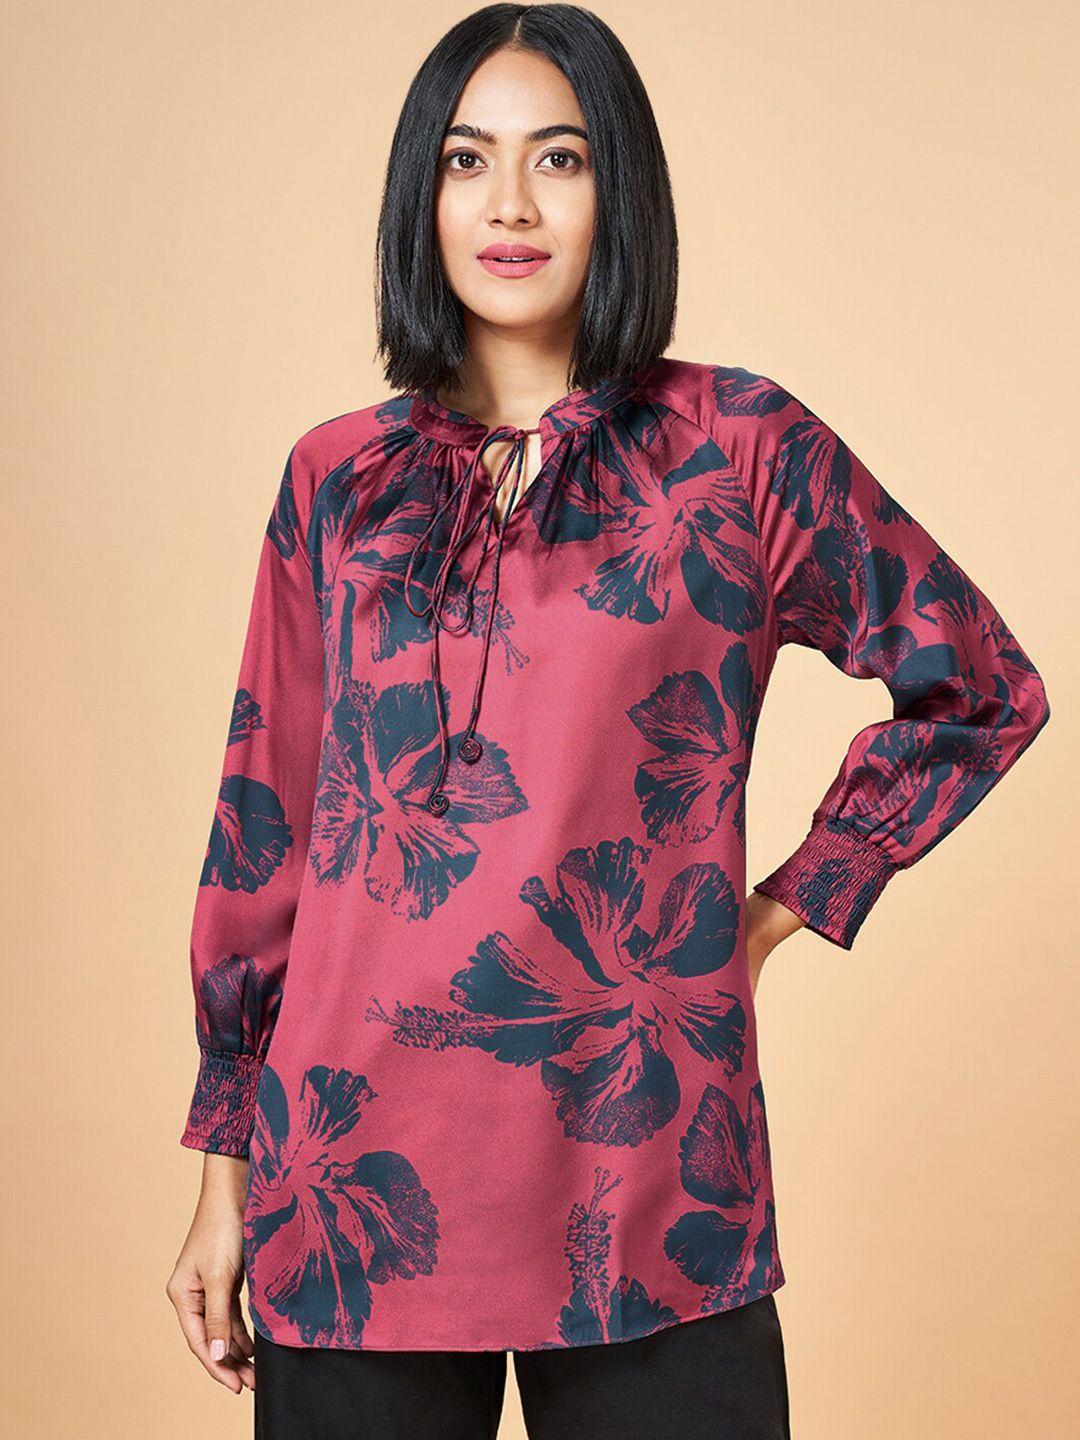 marigold lane floral print tie-up neck cuffed sleeves satin top